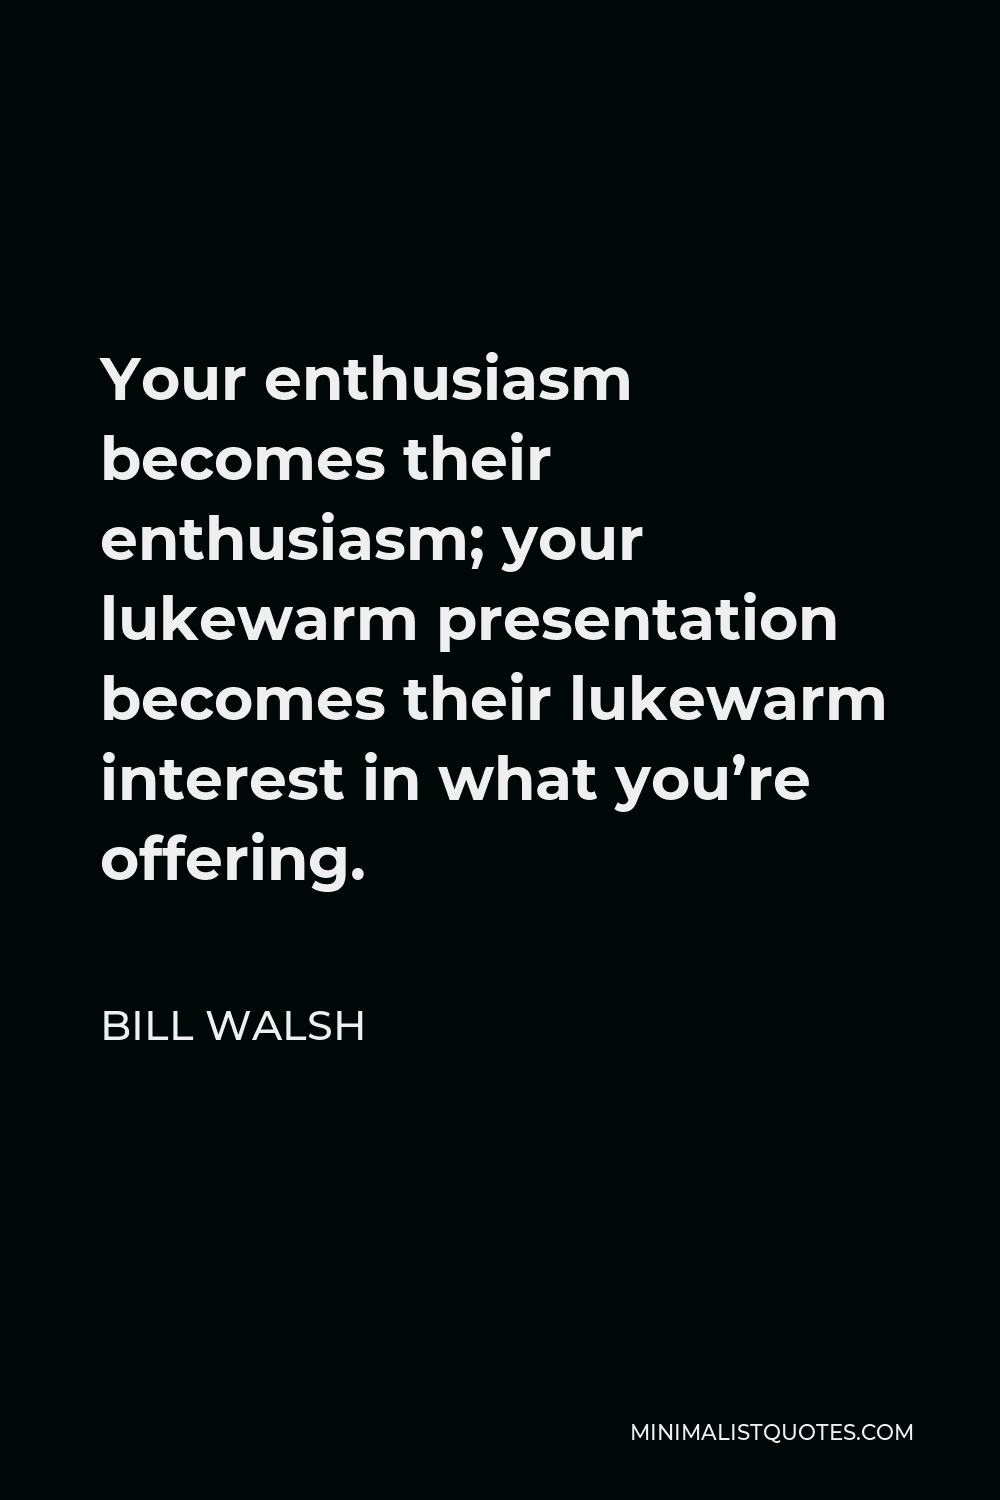 Bill Walsh Quote - Your enthusiasm becomes their enthusiasm; your lukewarm presentation becomes their lukewarm interest in what you’re offering.